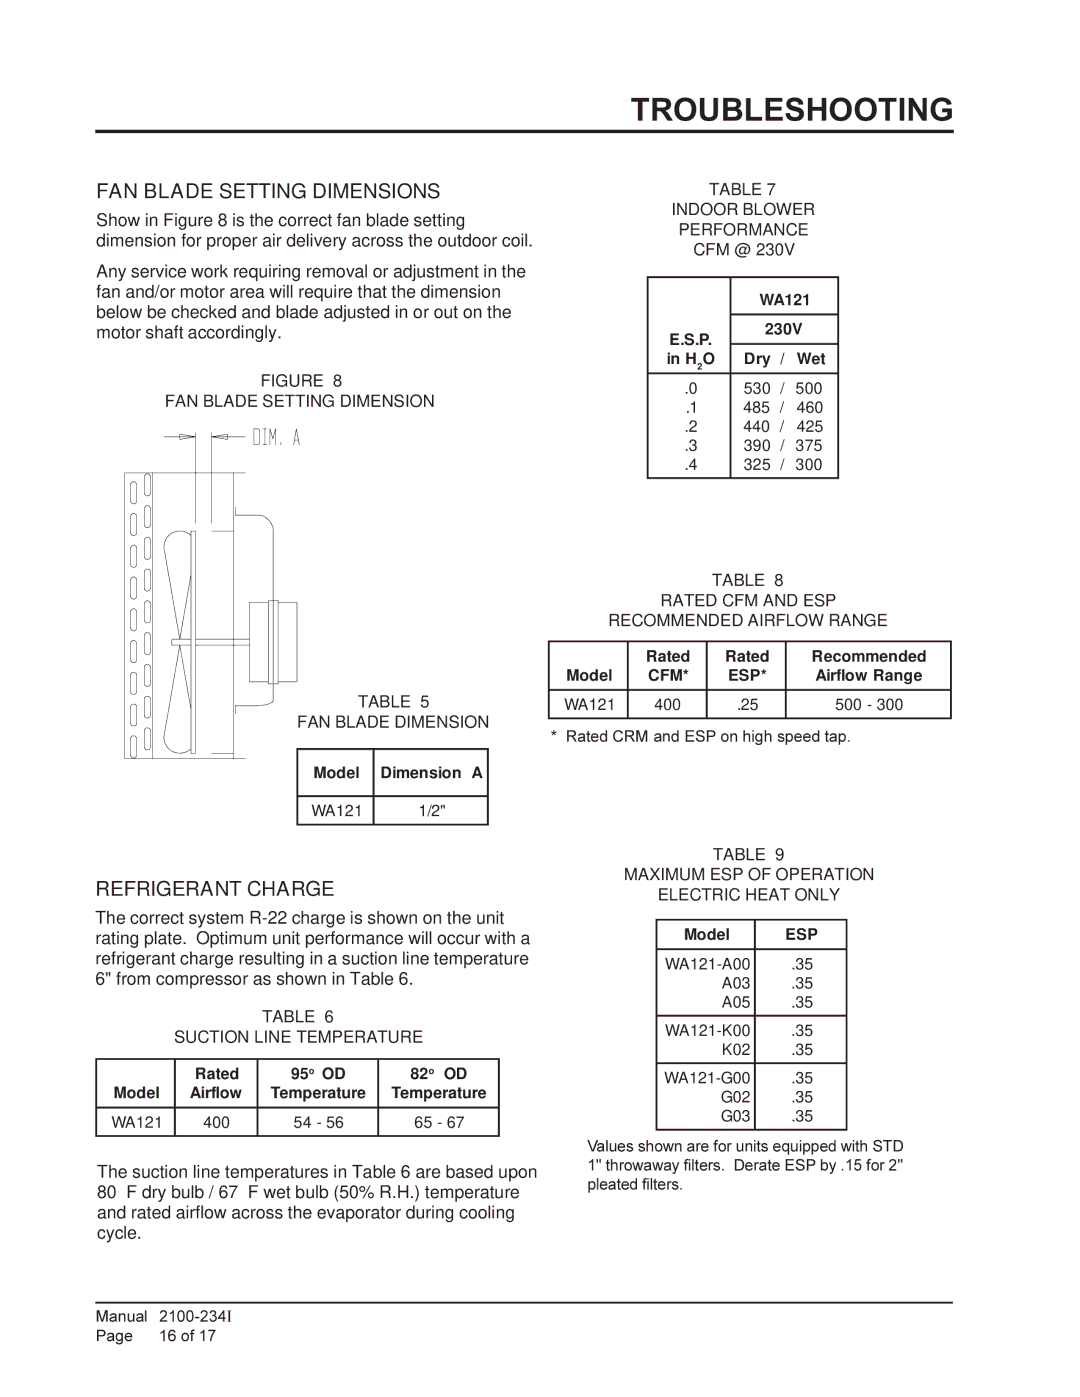 Bard WA121 installation instructions Troubleshooting, FAN Blade Setting Dimensions, Refrigerant Charge 